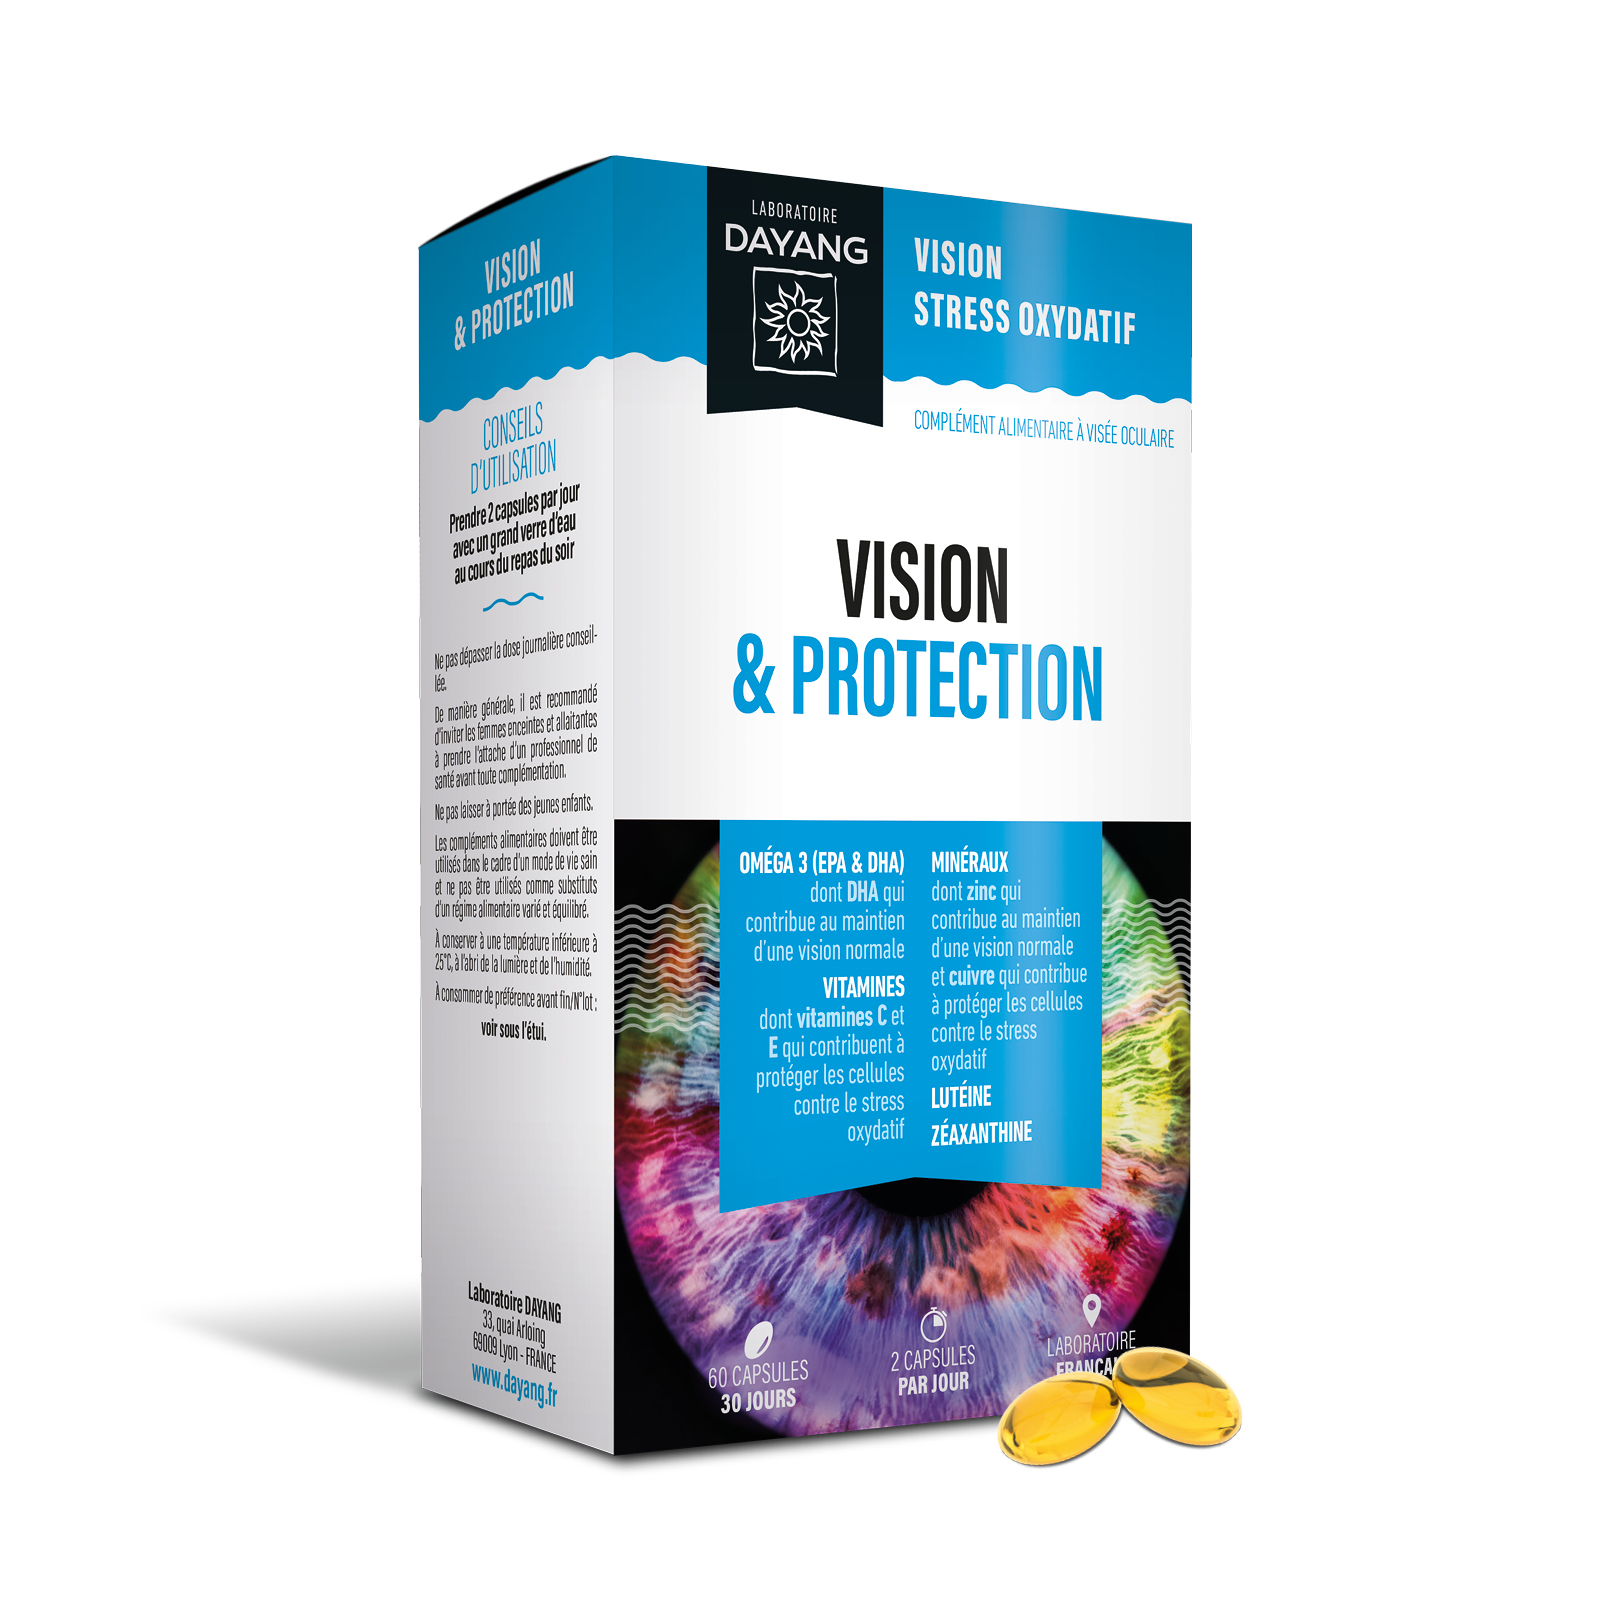 Vision & protection